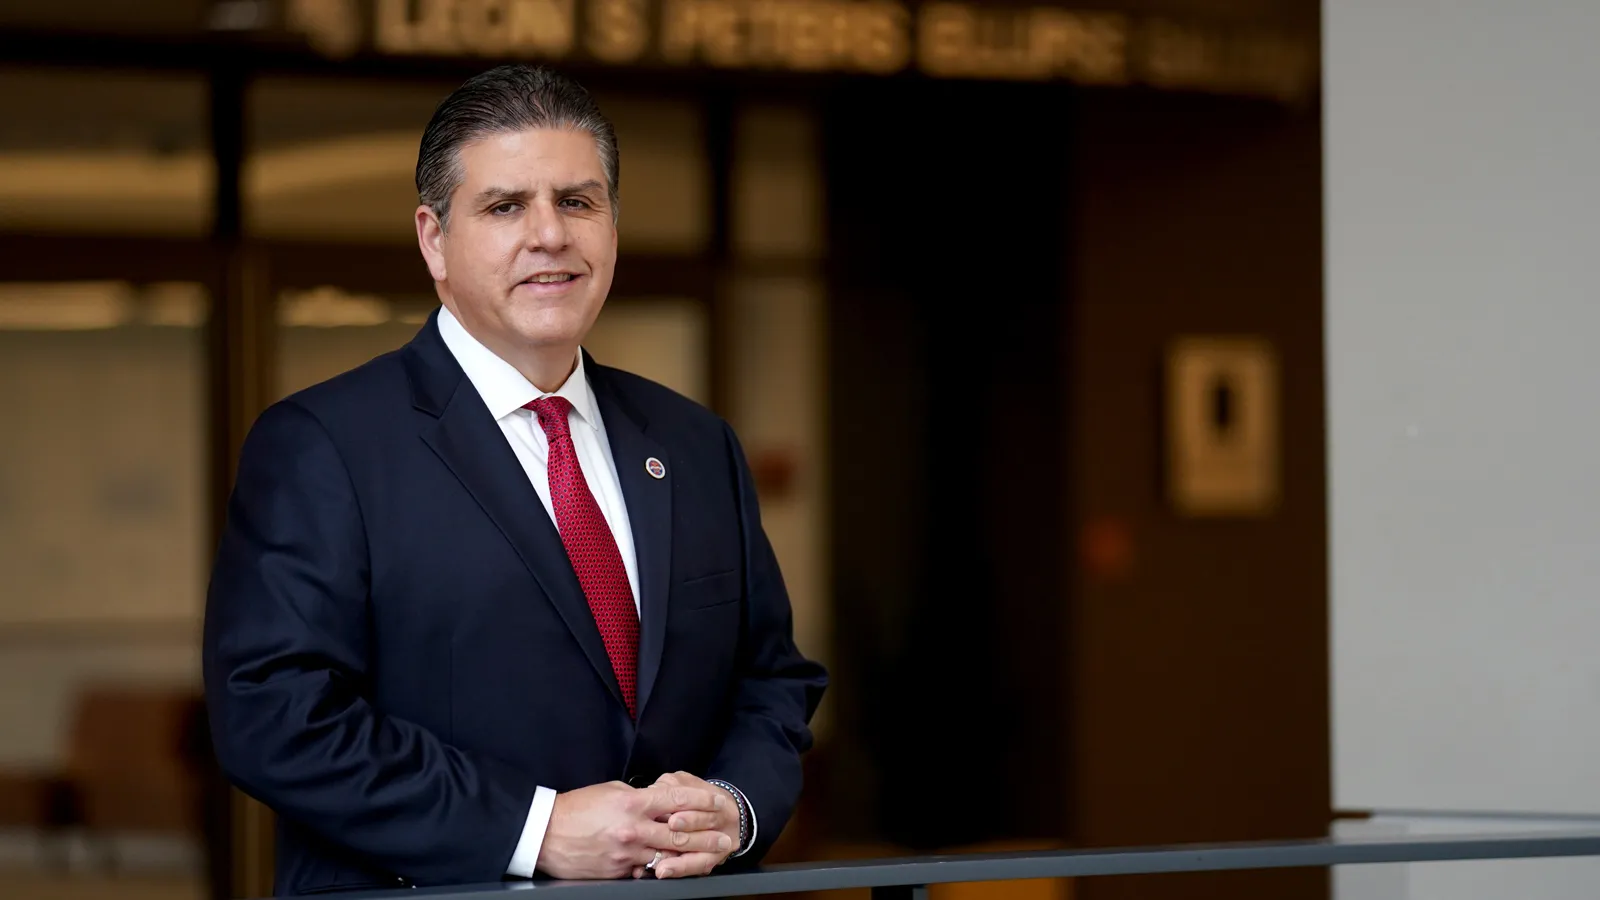 The California State University will host a livestream interview with Joseph Castro, the newly appointed chancellor of the California State University.